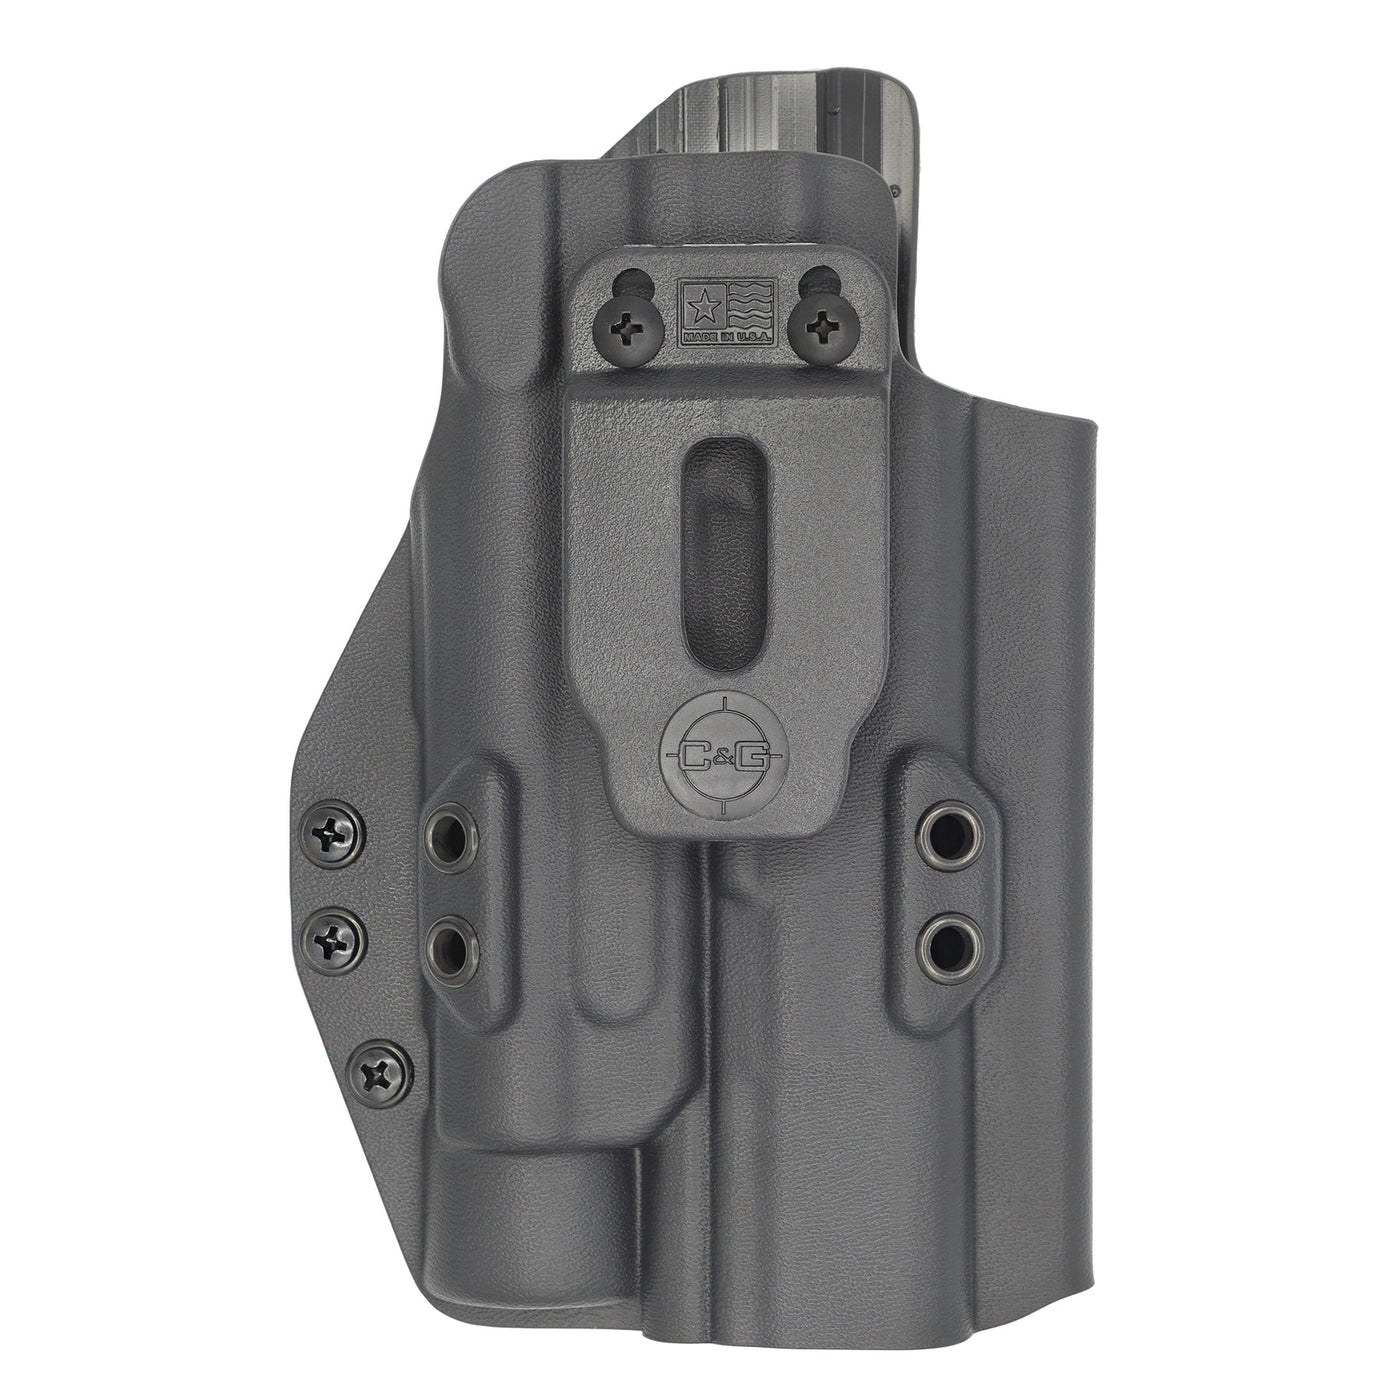 C&G Holsters quickship IWB Tactical CZ P07/9 TLR1